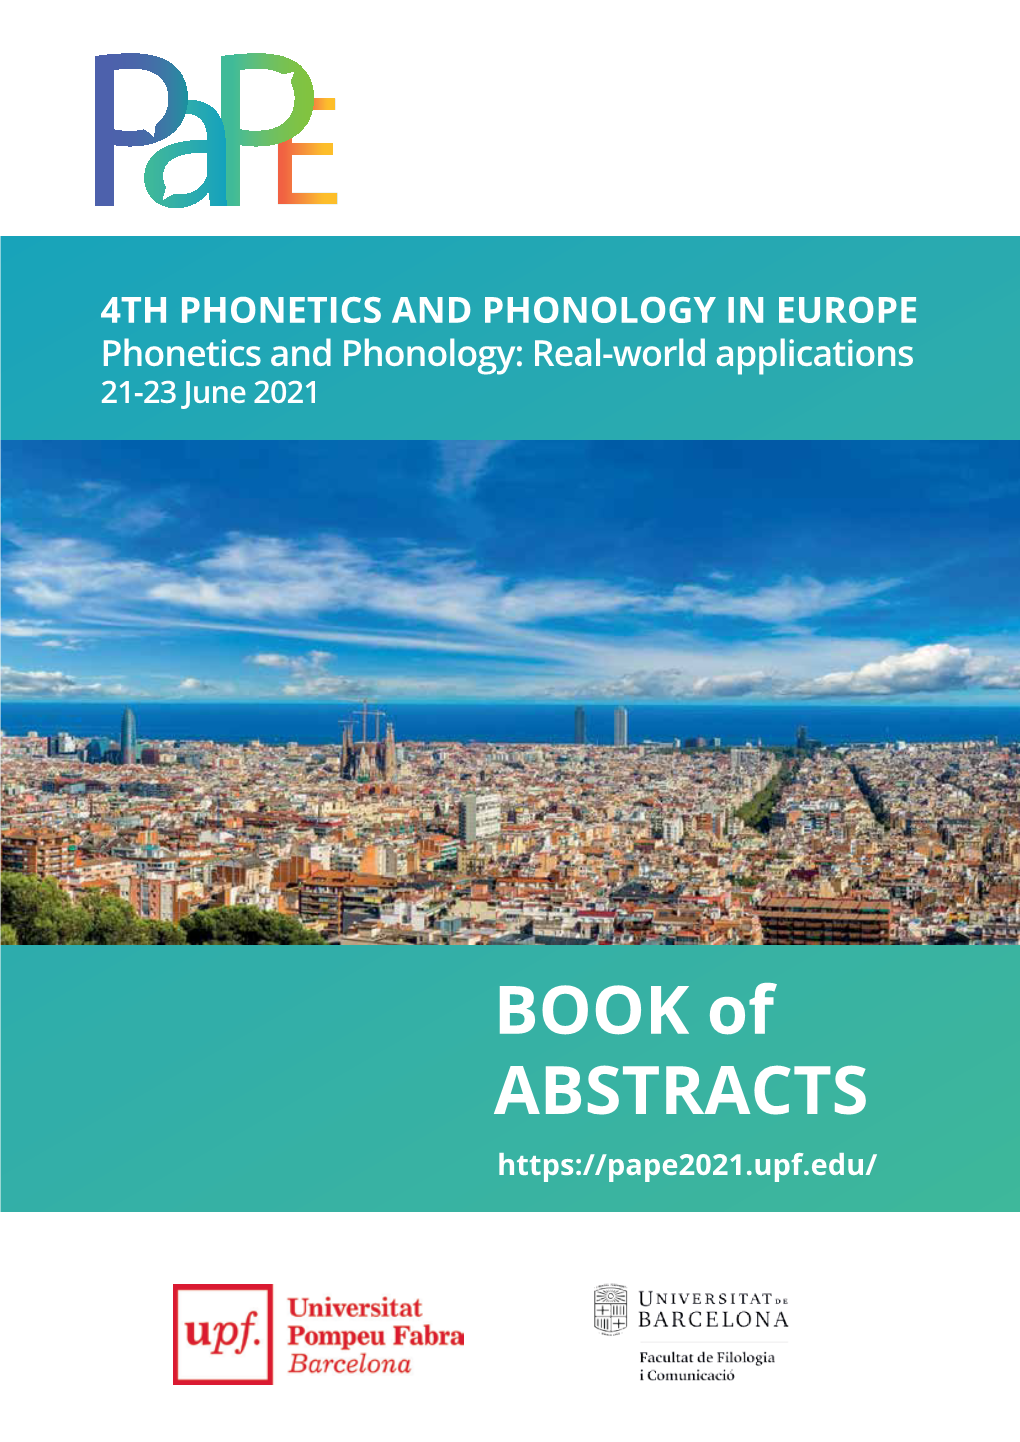 BOOK of ABSTRACTS CONTENTS